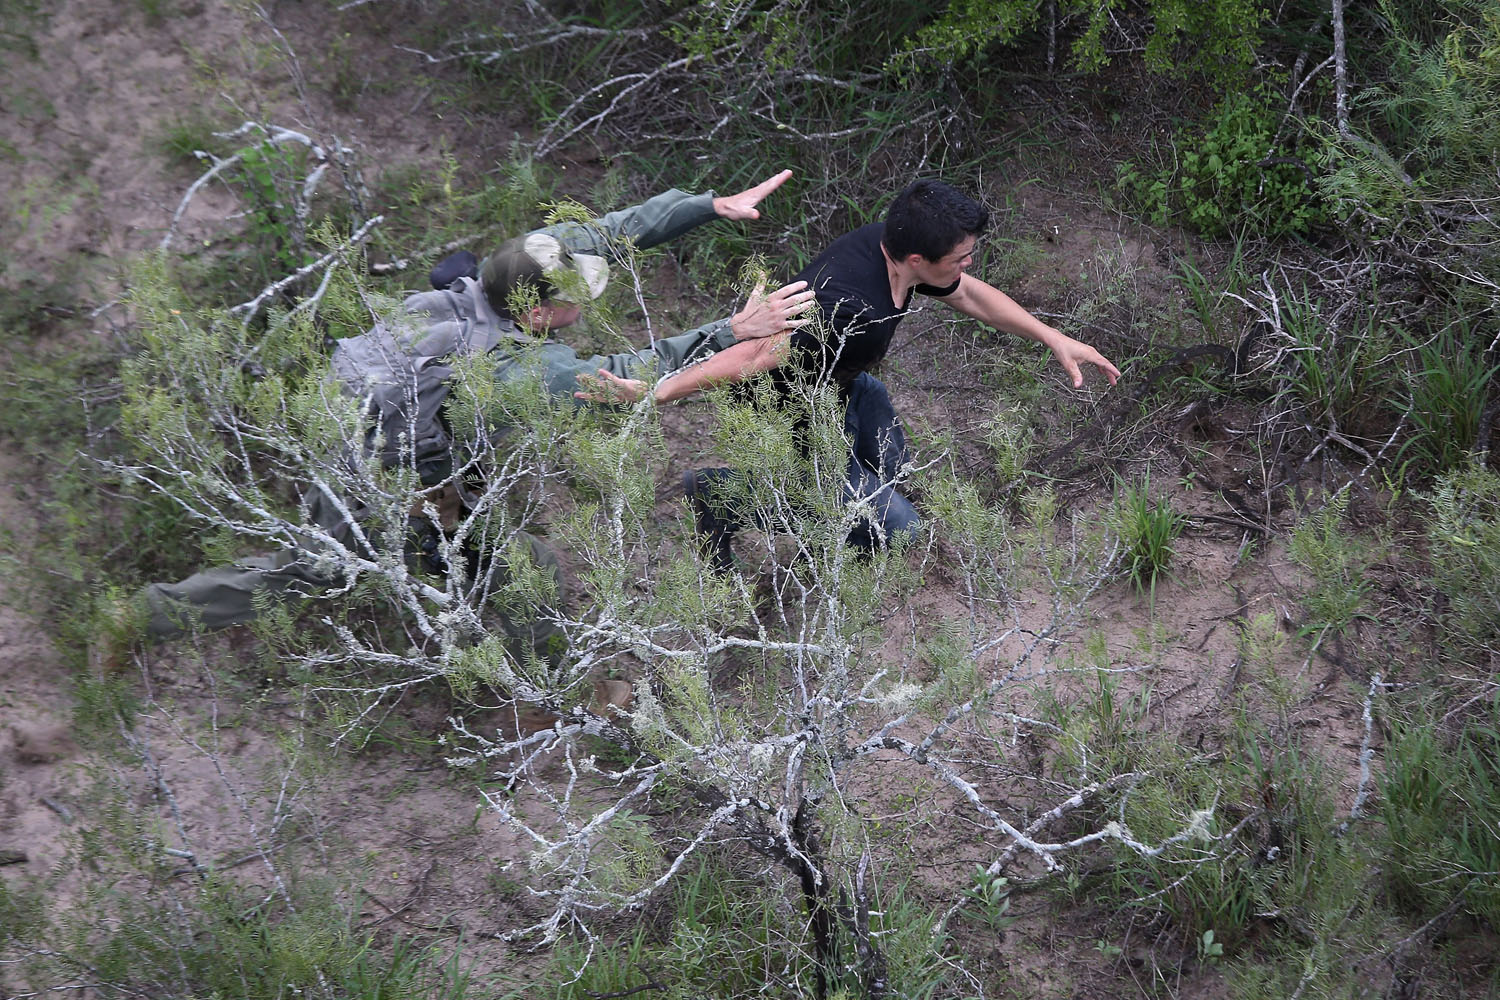 Sept. 9, 2014.  A U.S. Border Patrol agent tries to tackle an undocumented immigrant in dense underbrush near Falfurrias, Texas. Thousands of migrants continue to cross illegally from Mexico into the United States, and Texas' Rio Grande Valley has more traffic than any other sector of the U.S.-Mexico border.